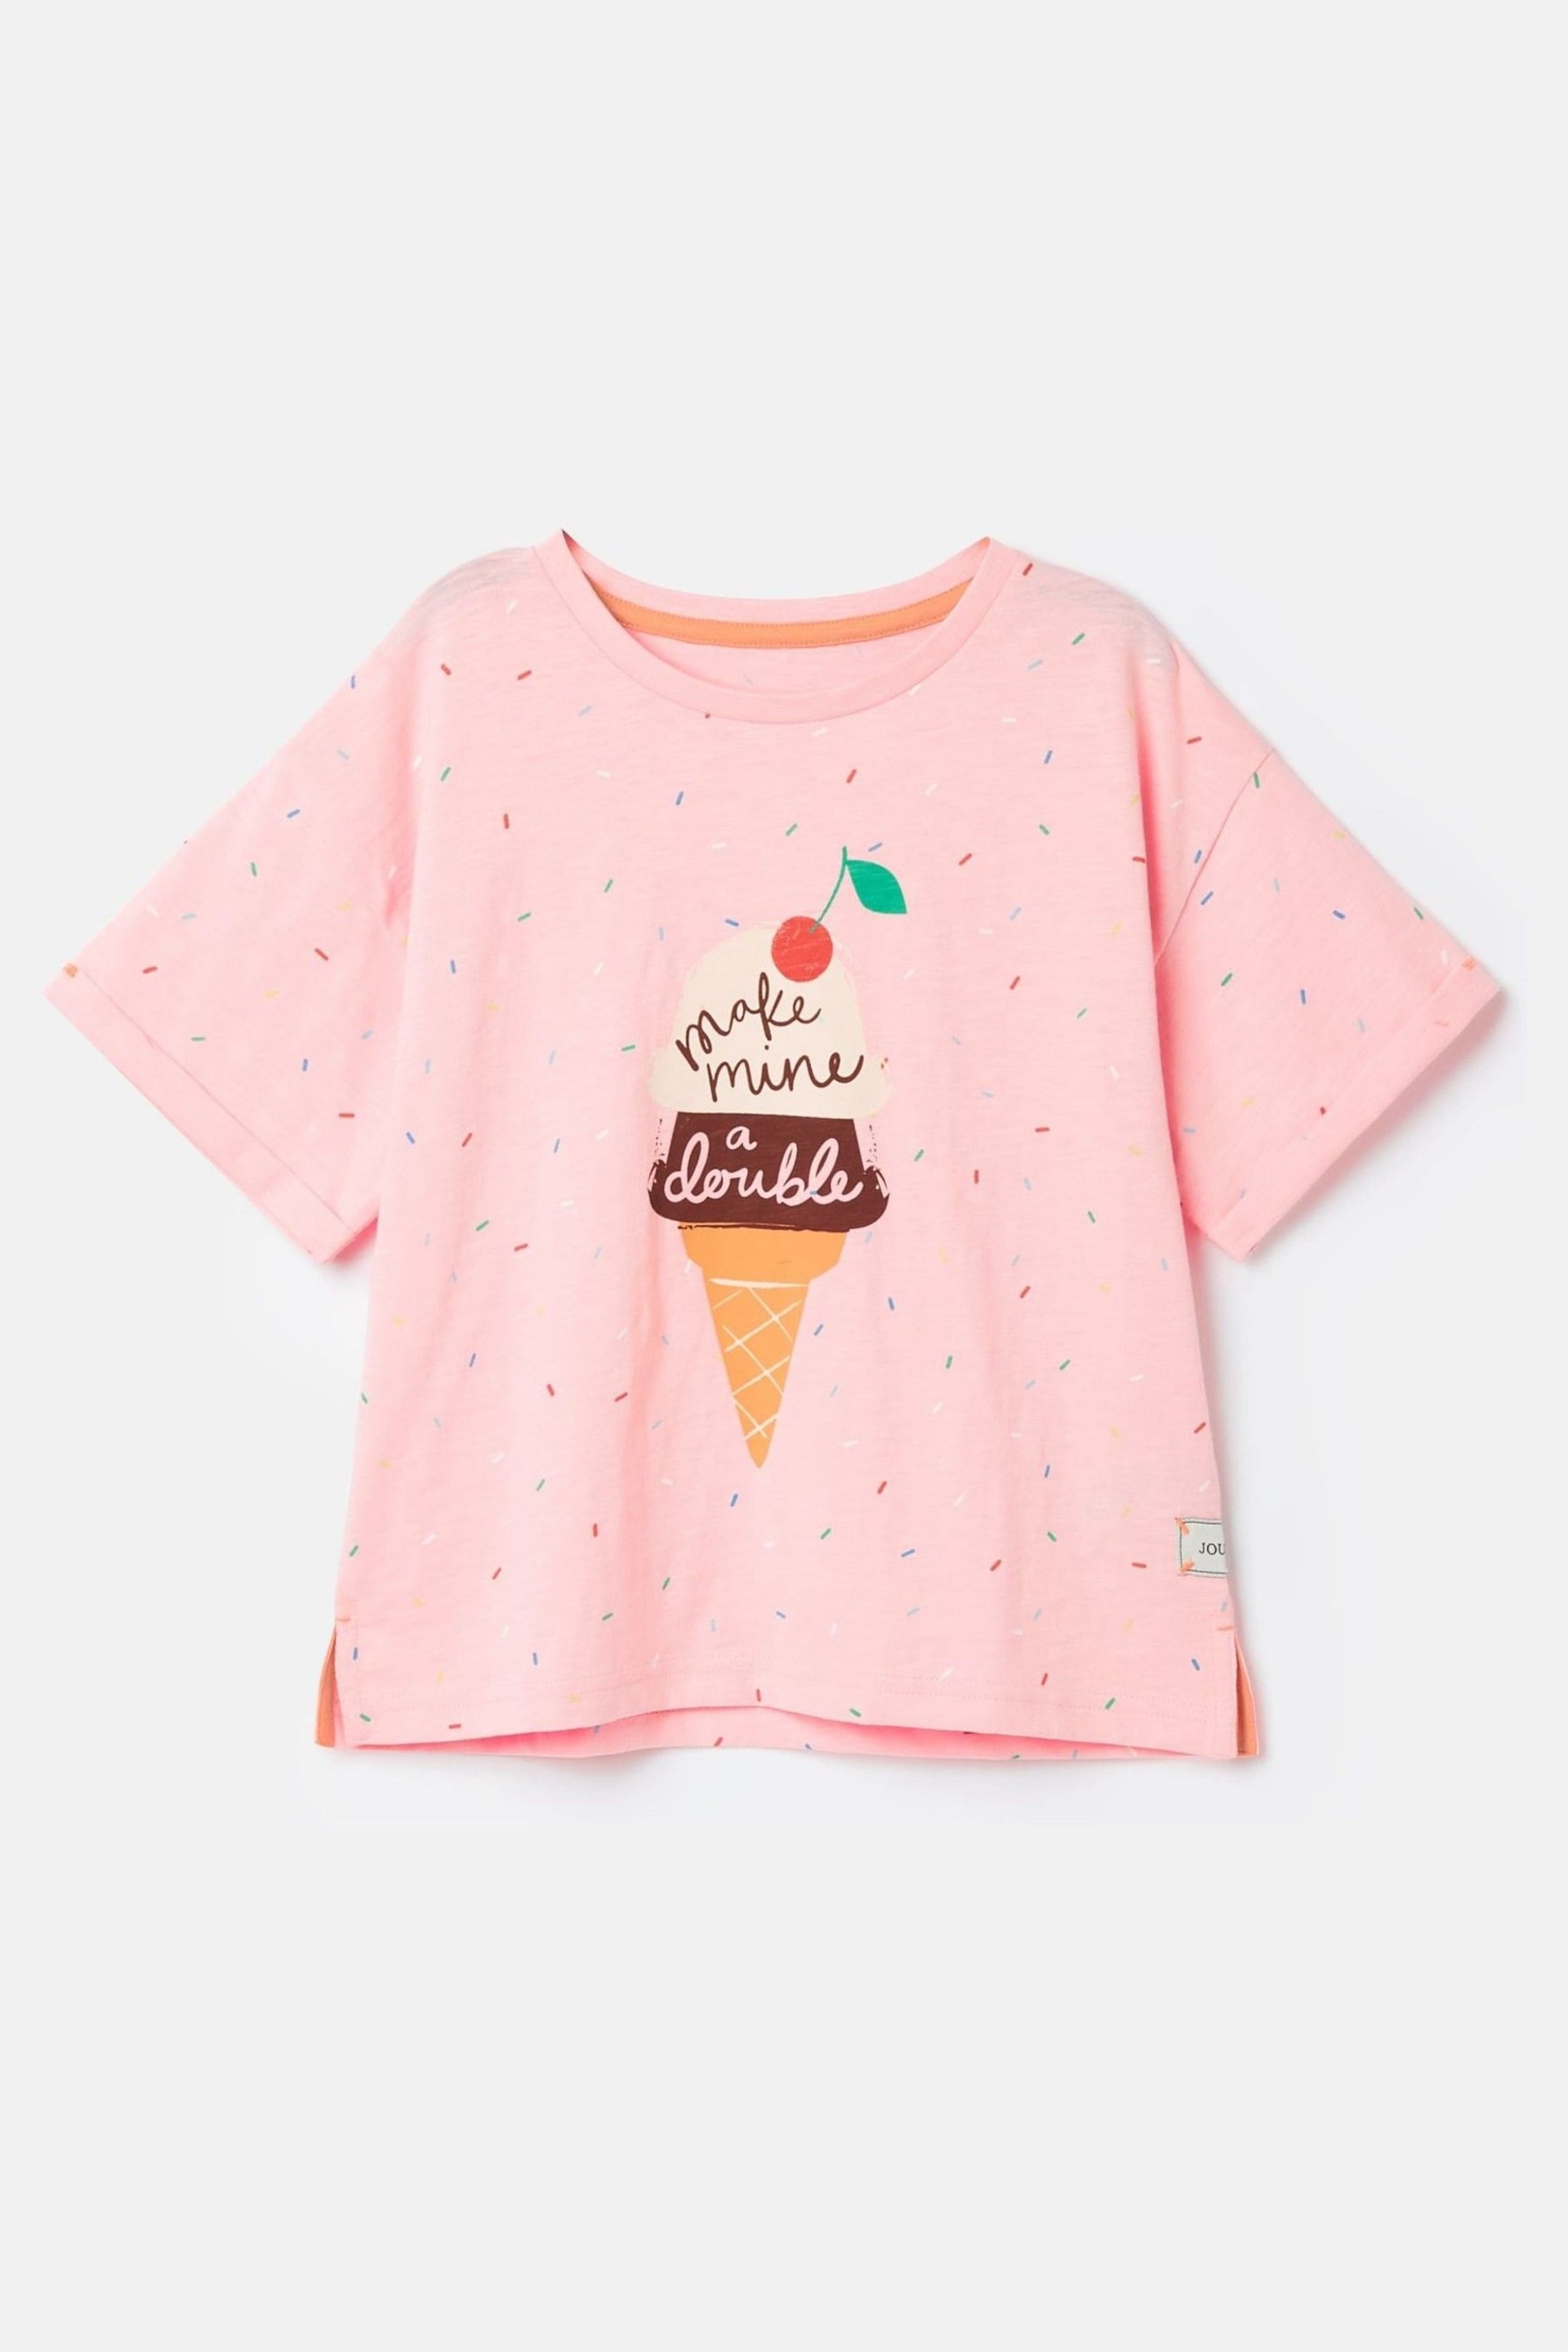 Joules Fun Days Pink Short Sleeve Graphic T-shirt - Image 3 of 7